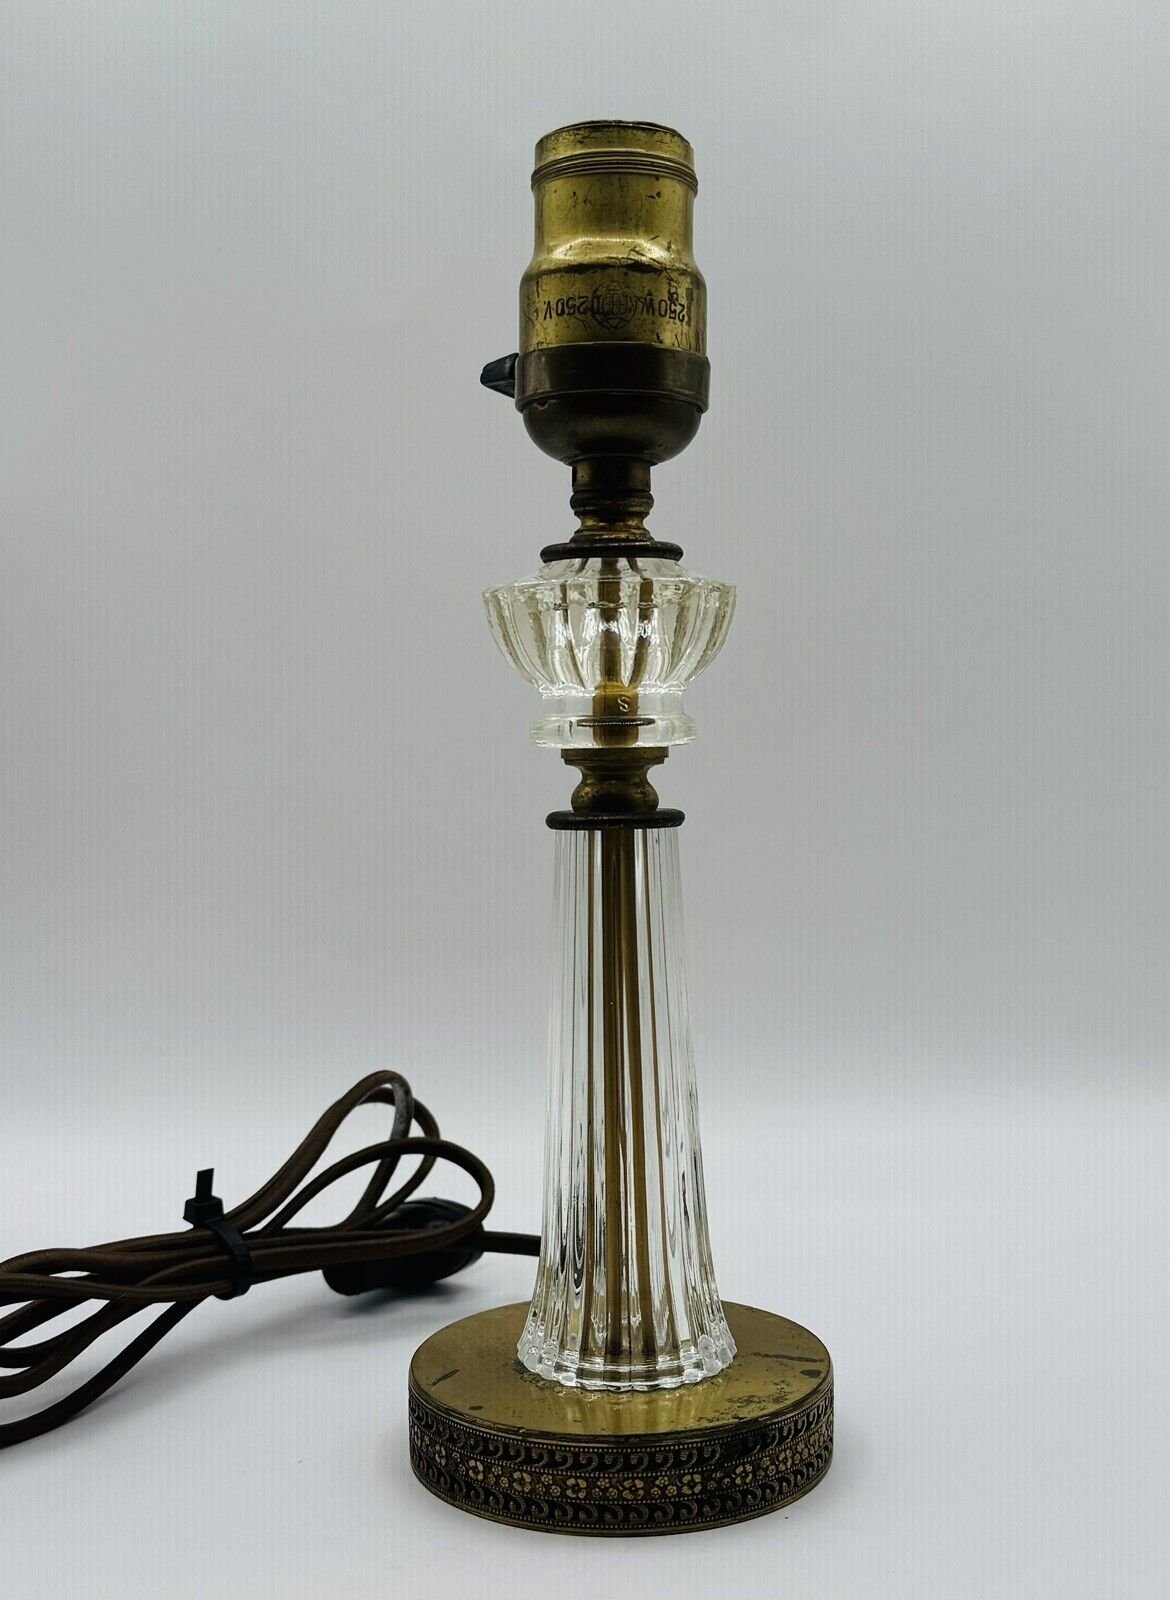 Vintage 1940s Hubbell Candlestick Boudoir Table Lamp